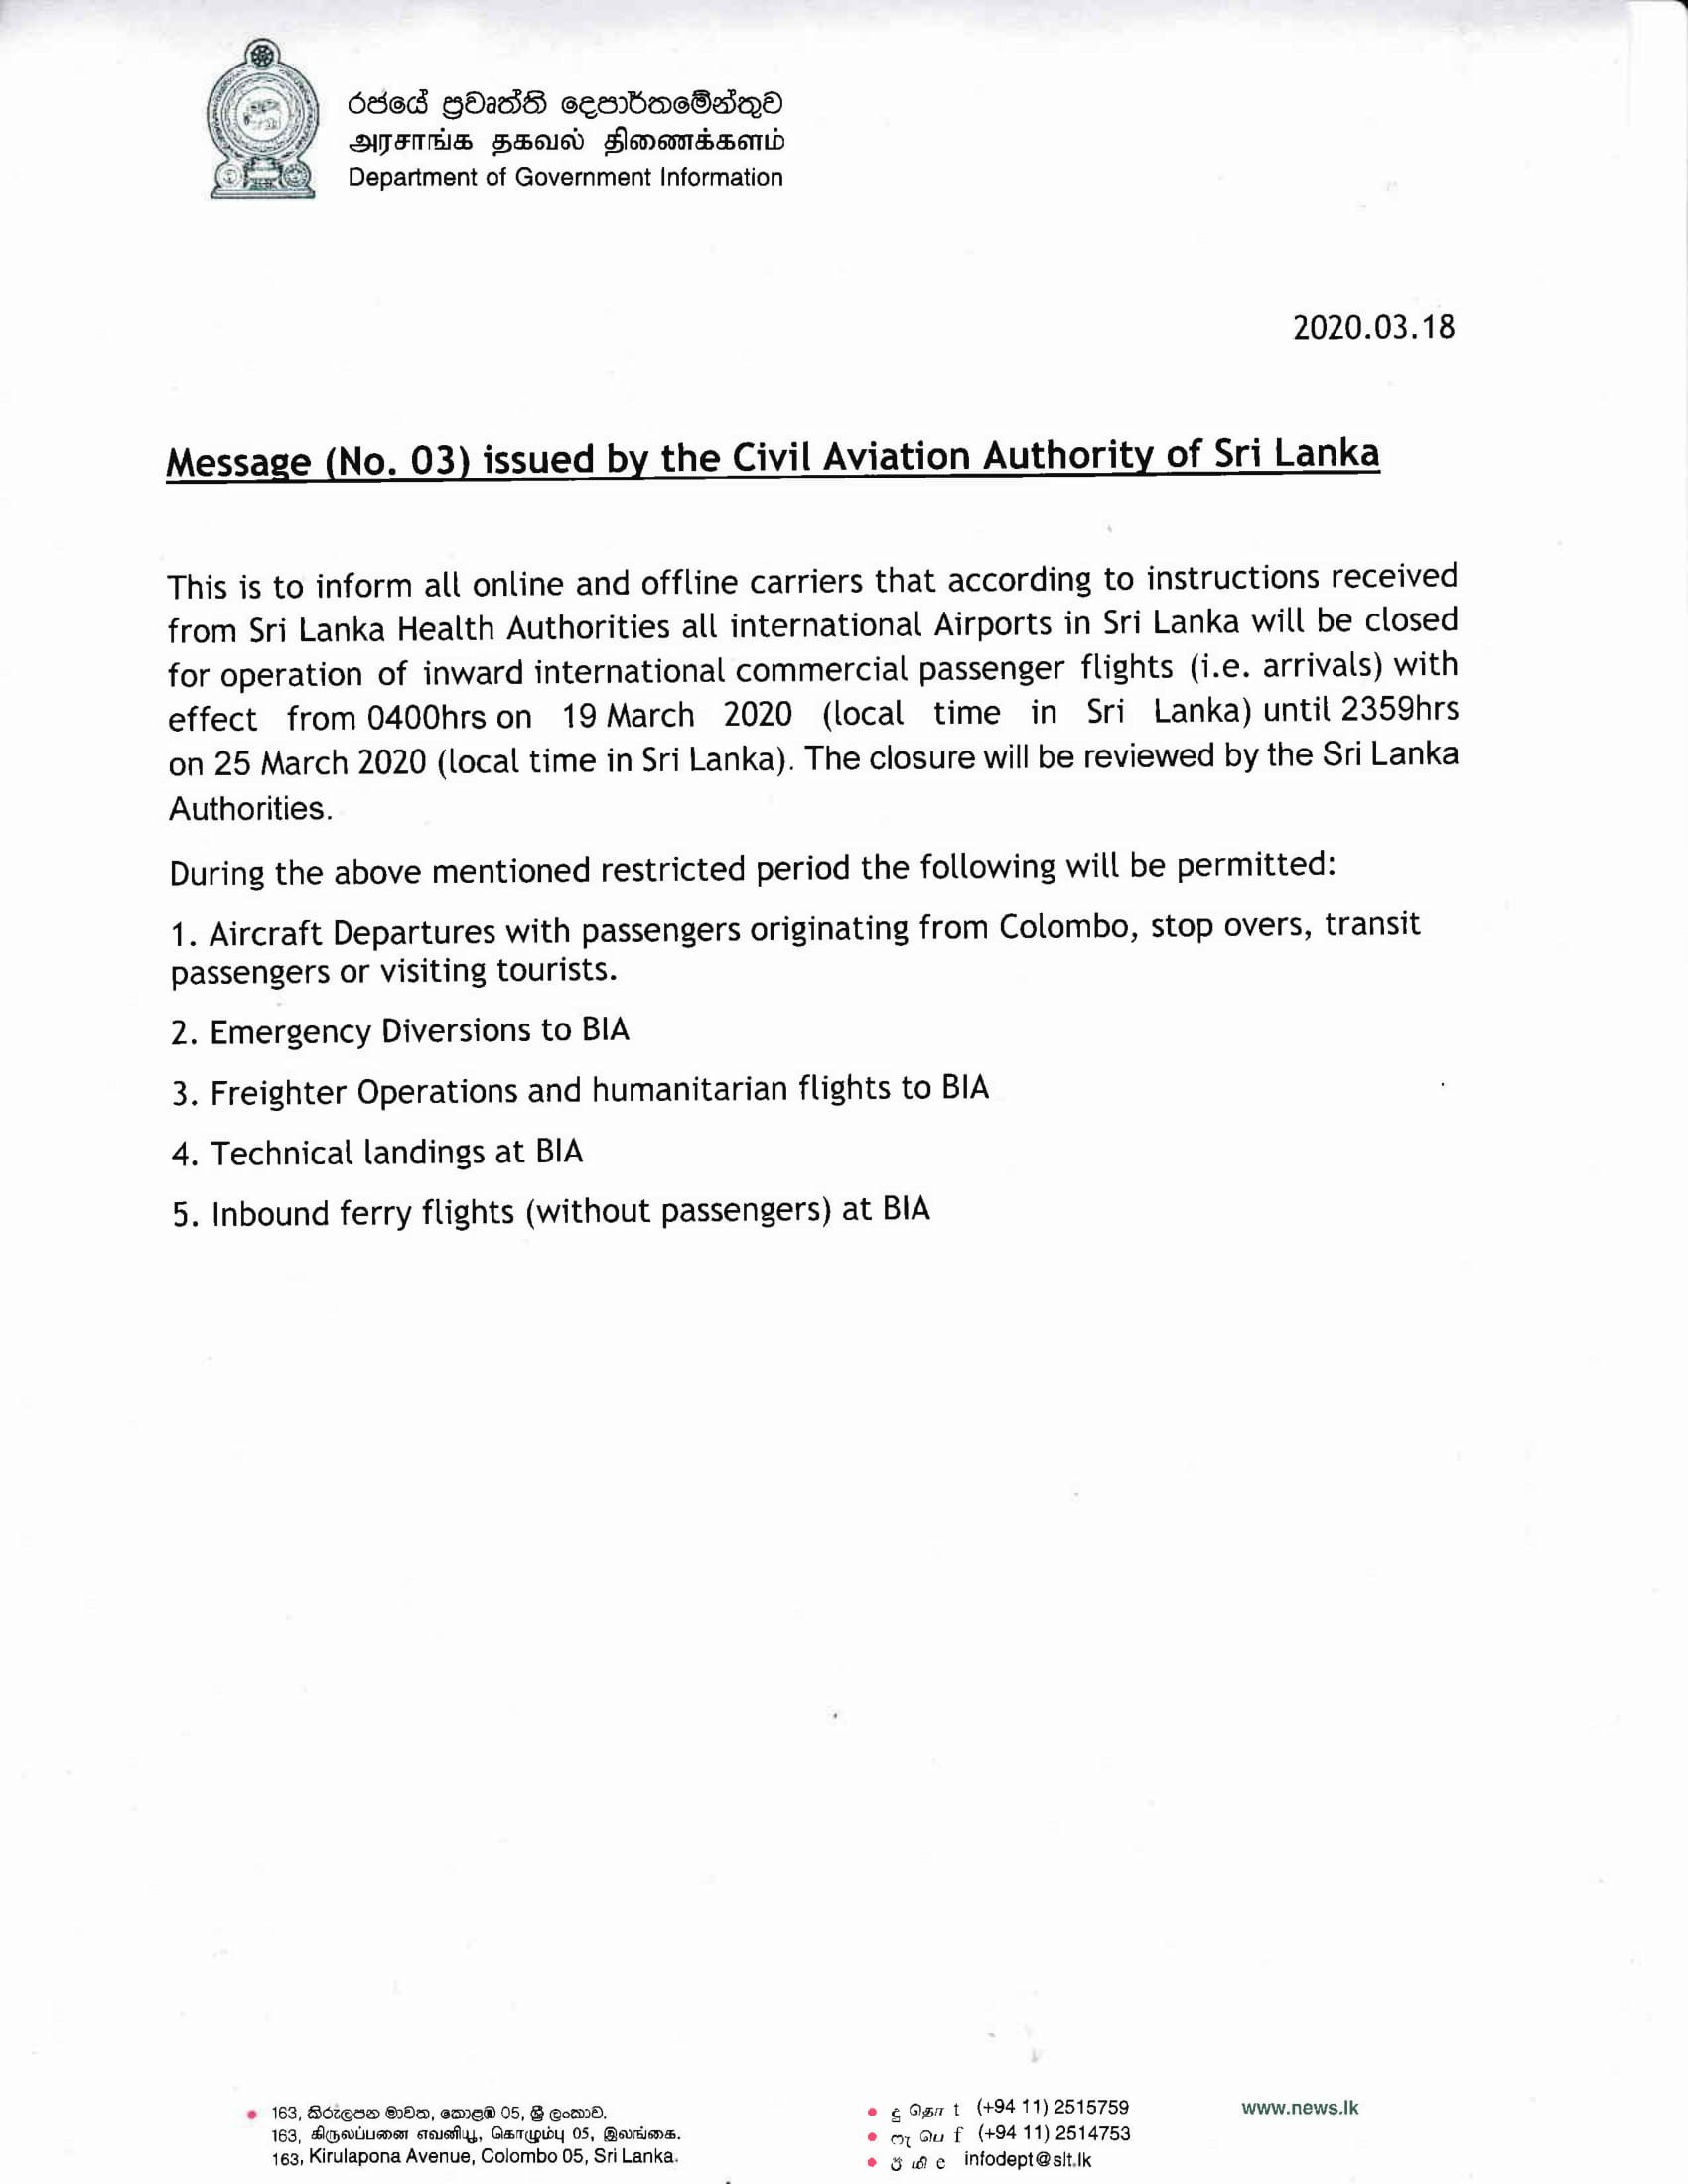 Message No .03 issued by the Civil Aviation Authority of Sri Lanka 1